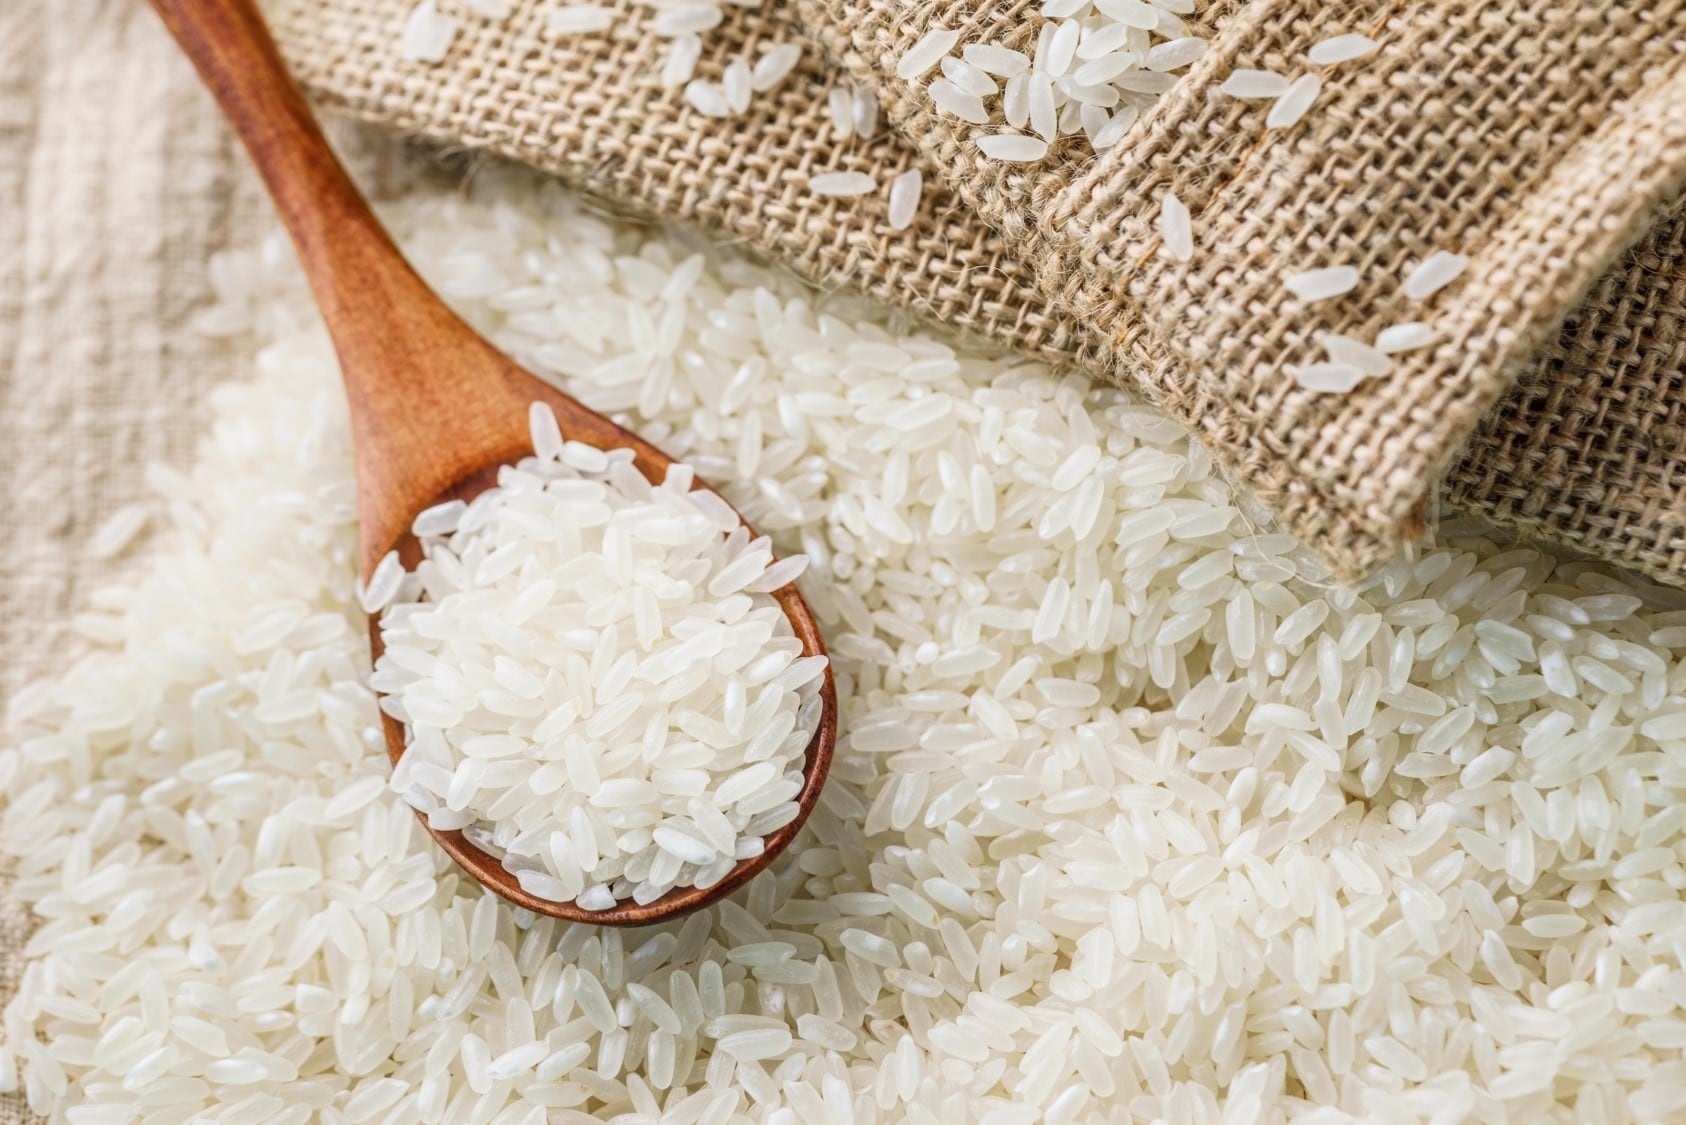 Fortifying Rice: A Public Health Panacea?